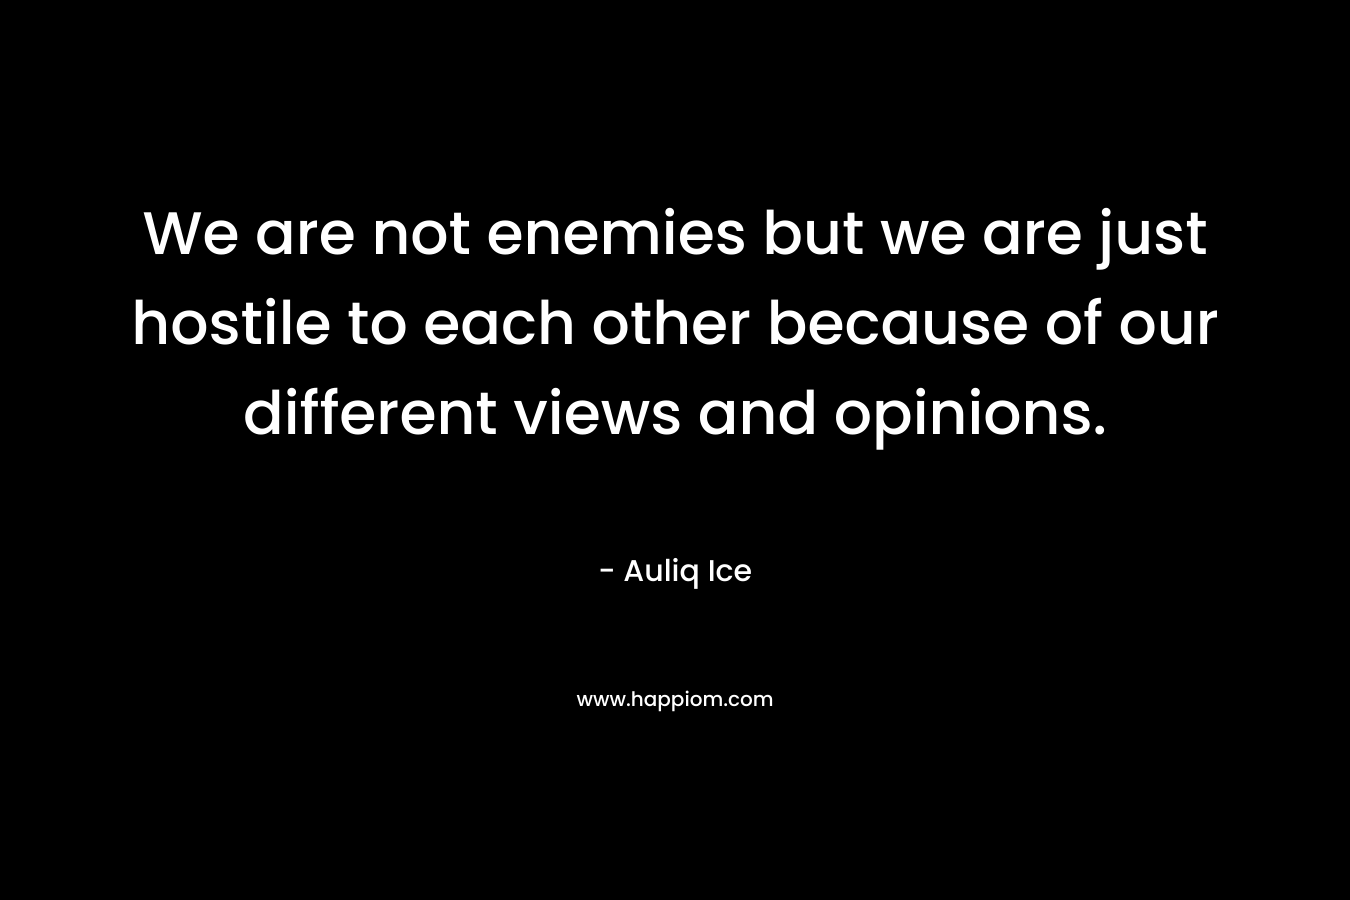 We are not enemies but we are just hostile to each other because of our different views and opinions. – Auliq Ice